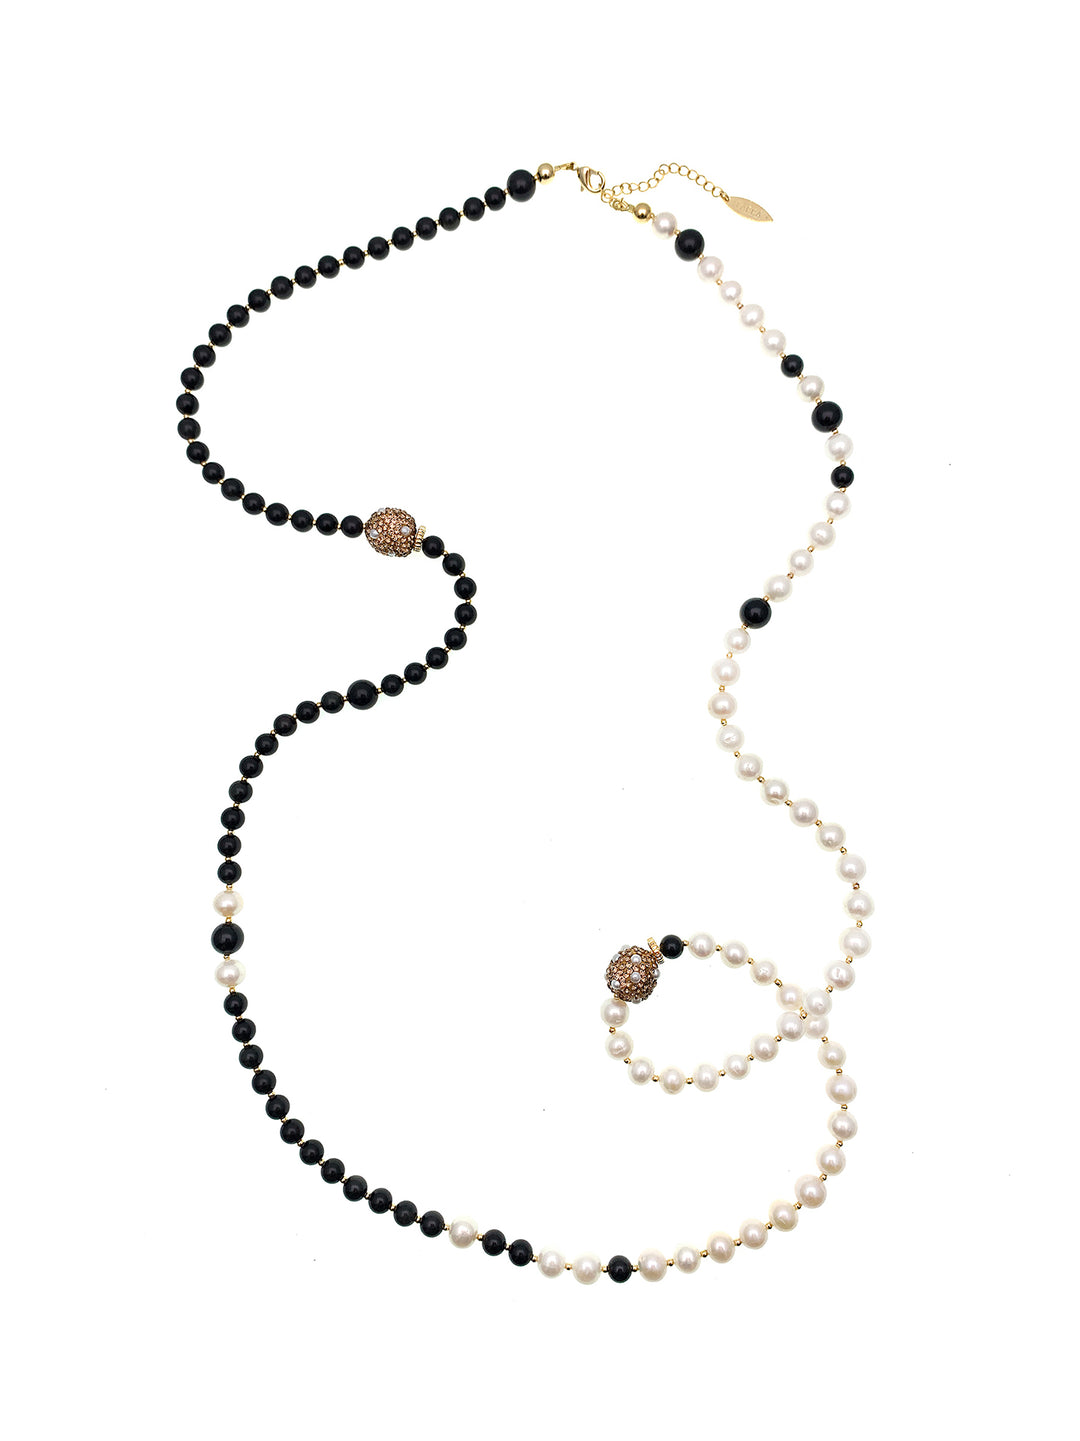 Freshwater Pearls With Black Obsidian Two Ways Necklace FN029 - FARRA